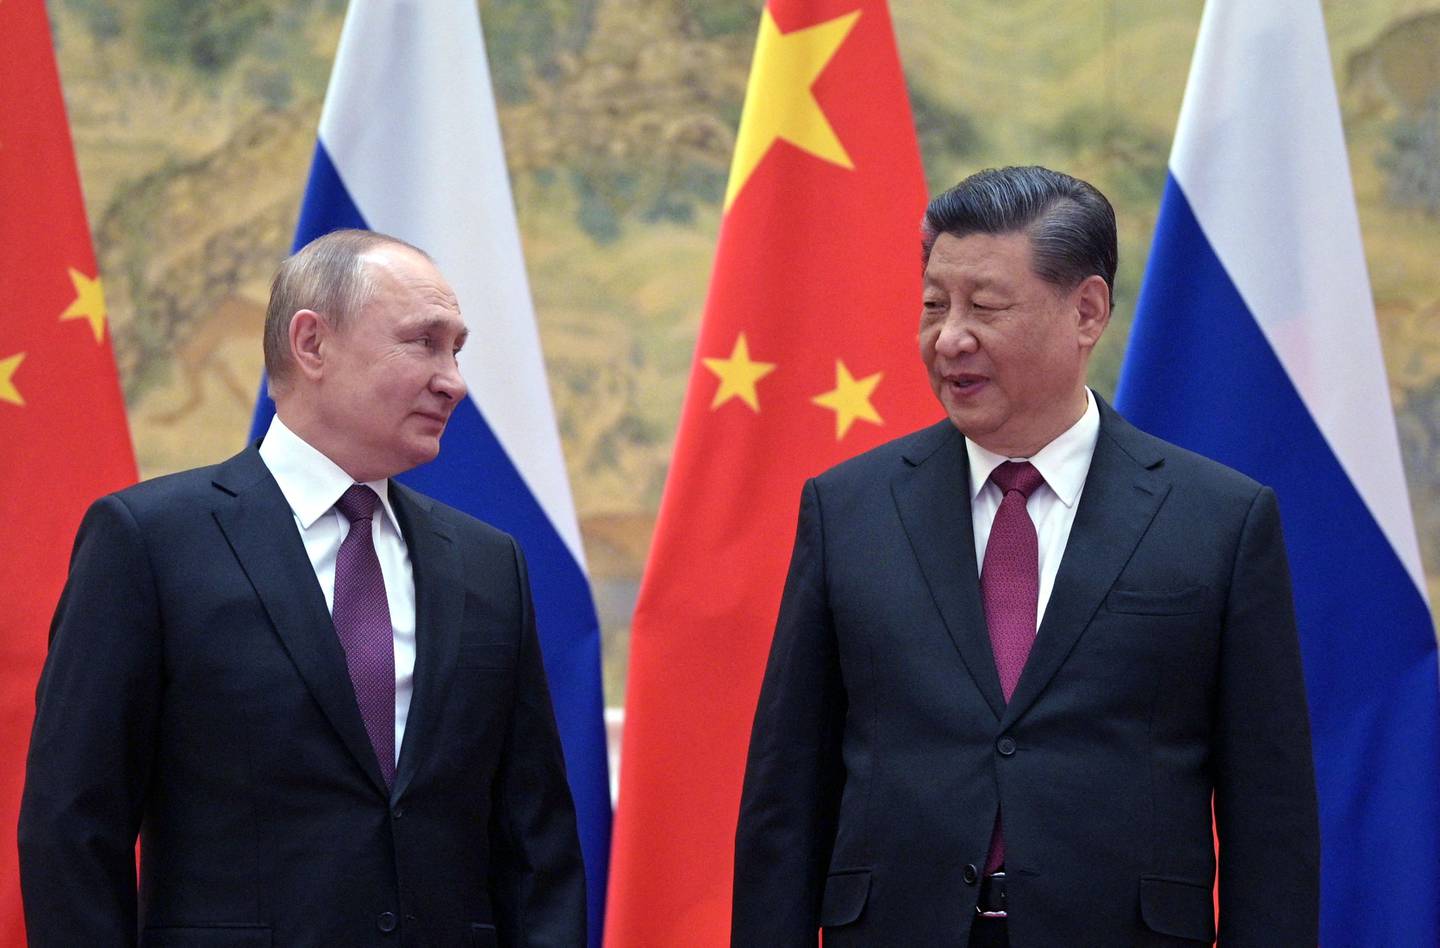 China is under pressure from the West for its support of Russia